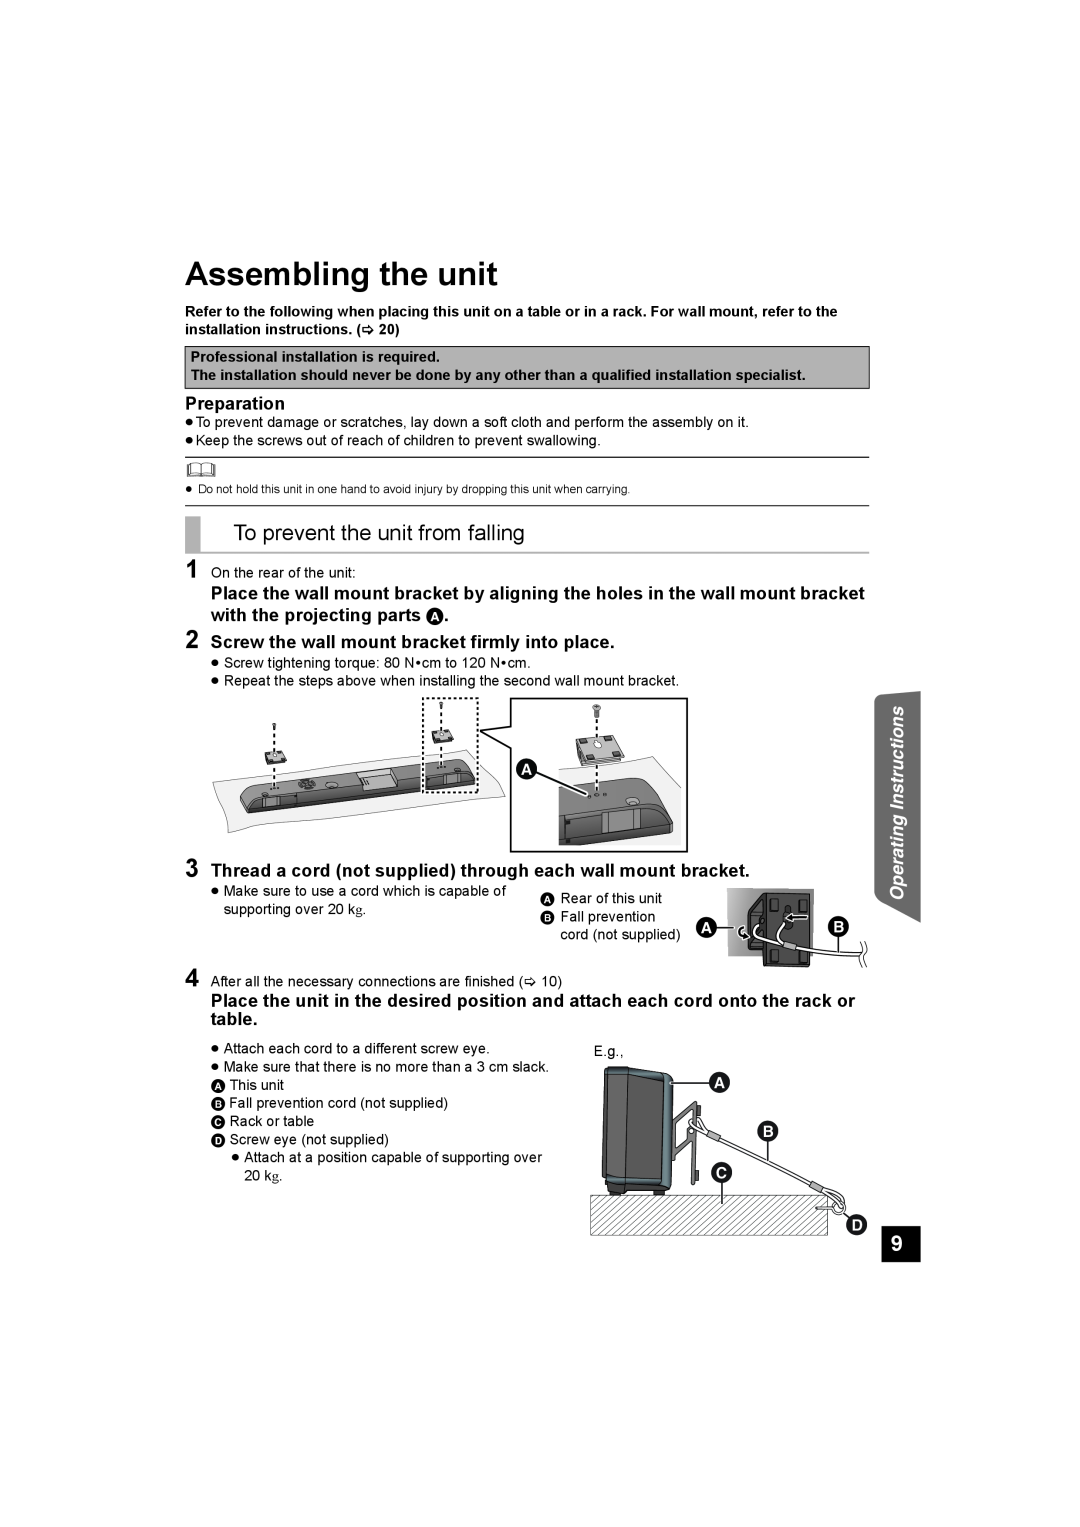 Panasonic SC-HTB10 Assembling the unit, To prevent the unit from falling,    , Operating Instructions 